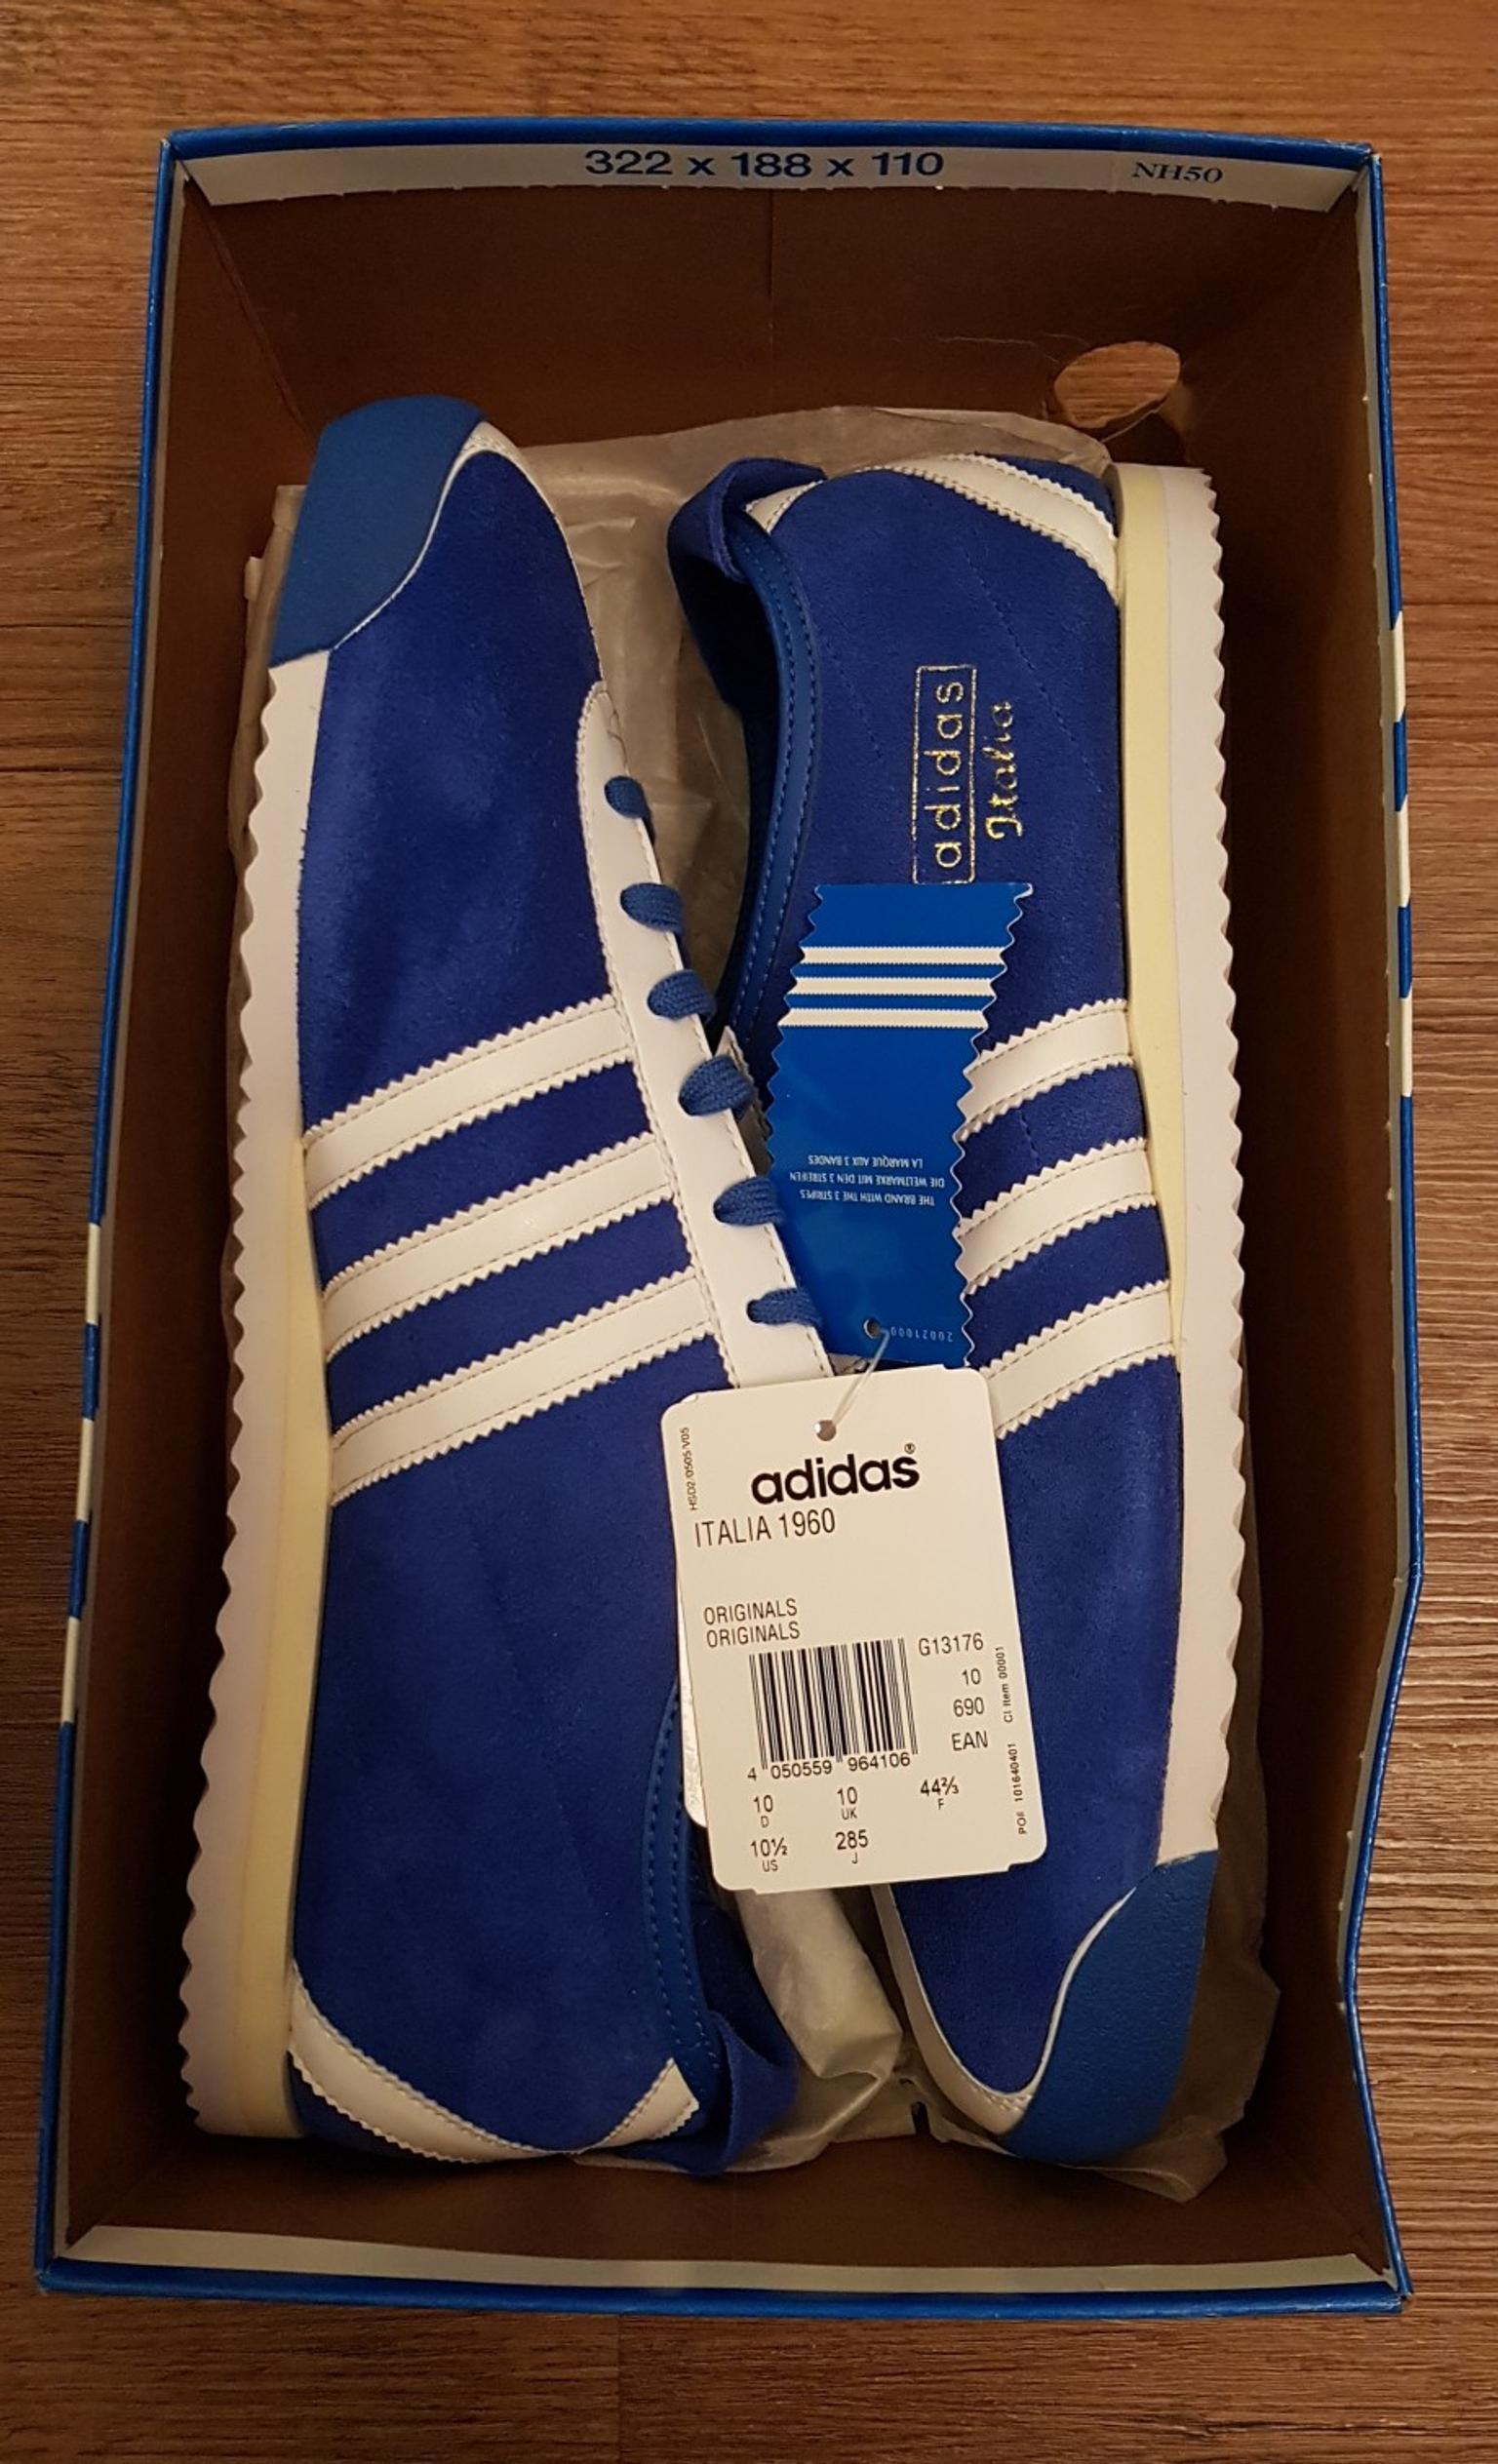 Adidas Italia 1960 Blue Suede UK10 NEW BNIB in L9 Liverpool for £70.00 for  sale | Shpock